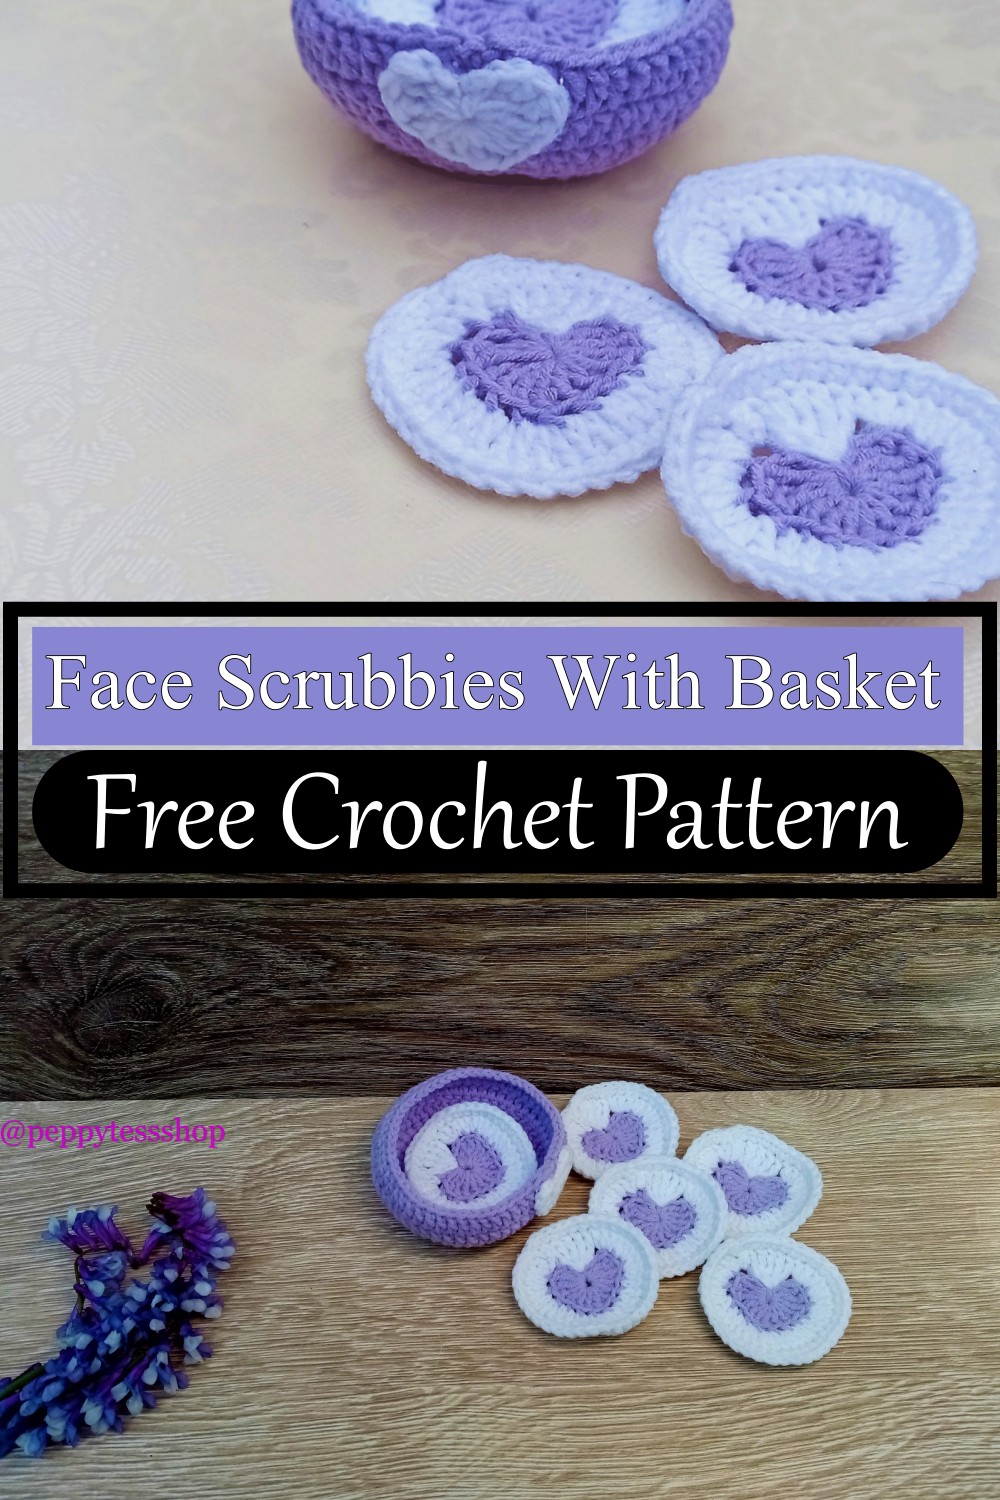 Face Scrubbies With Basket